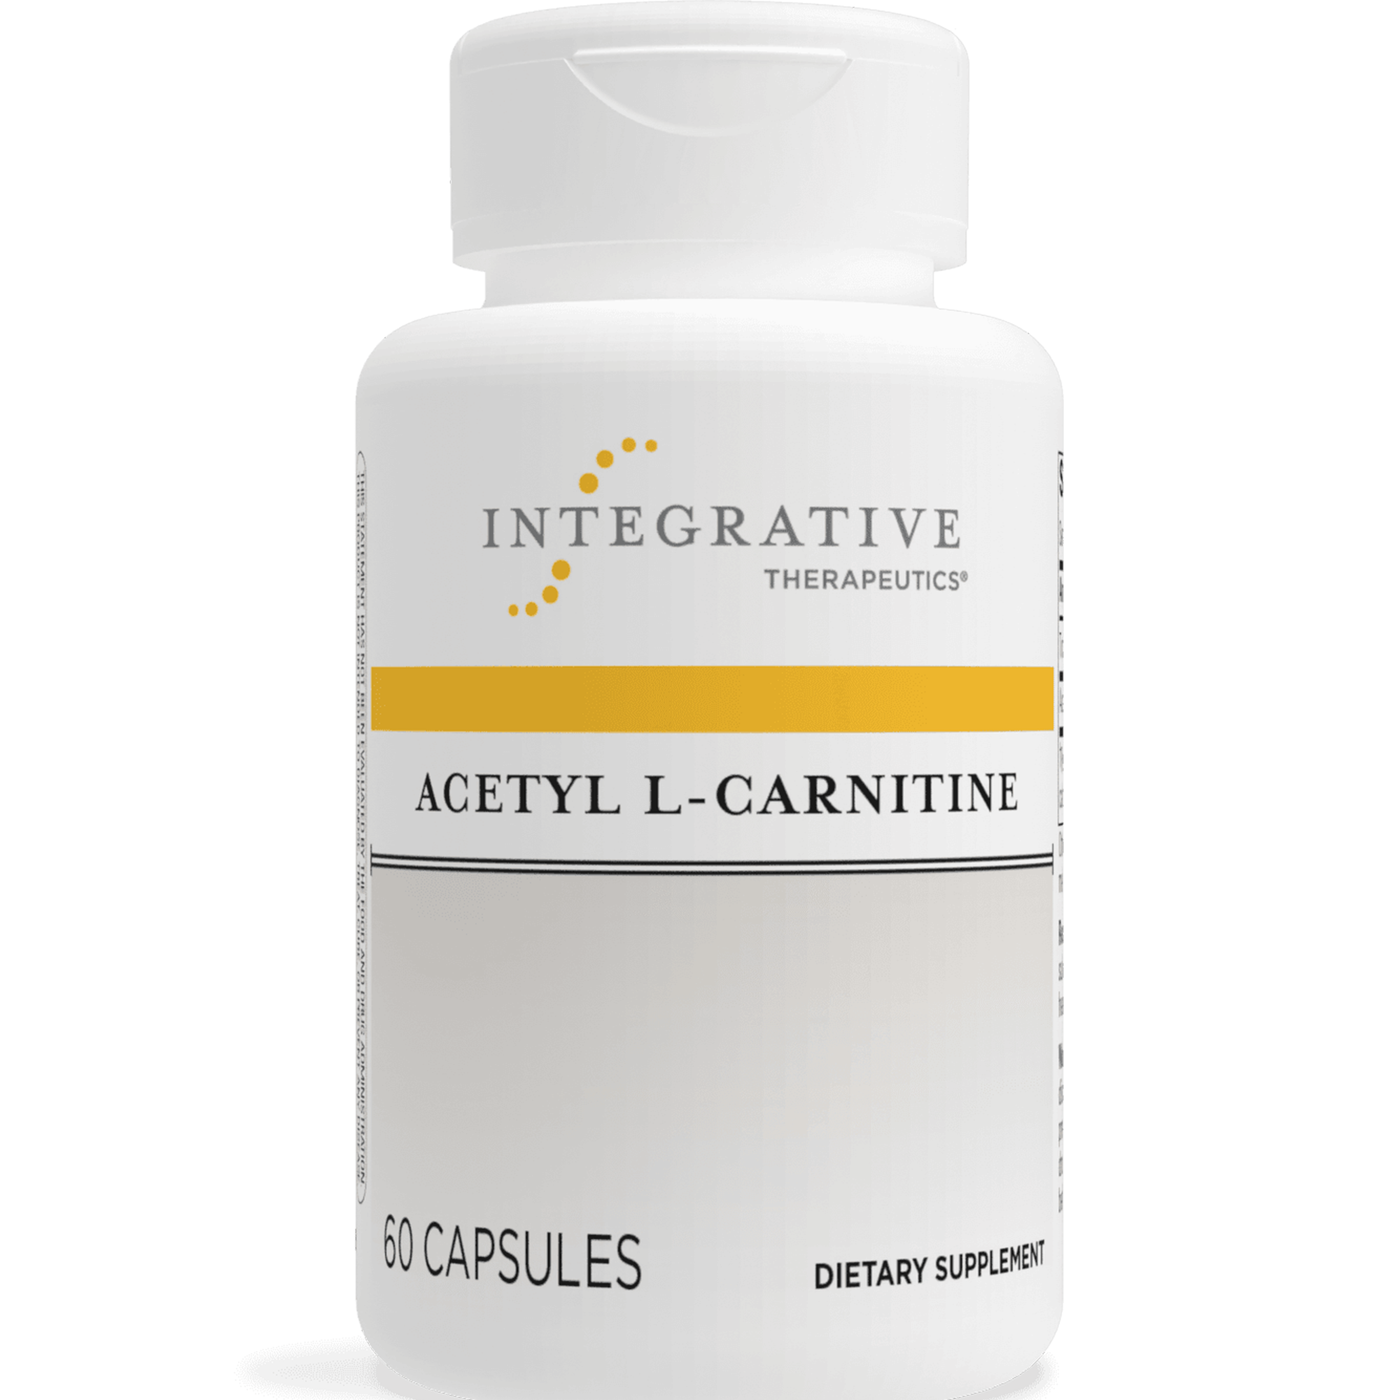 Acetyl L-Carnitine 60 caps Curated Wellness